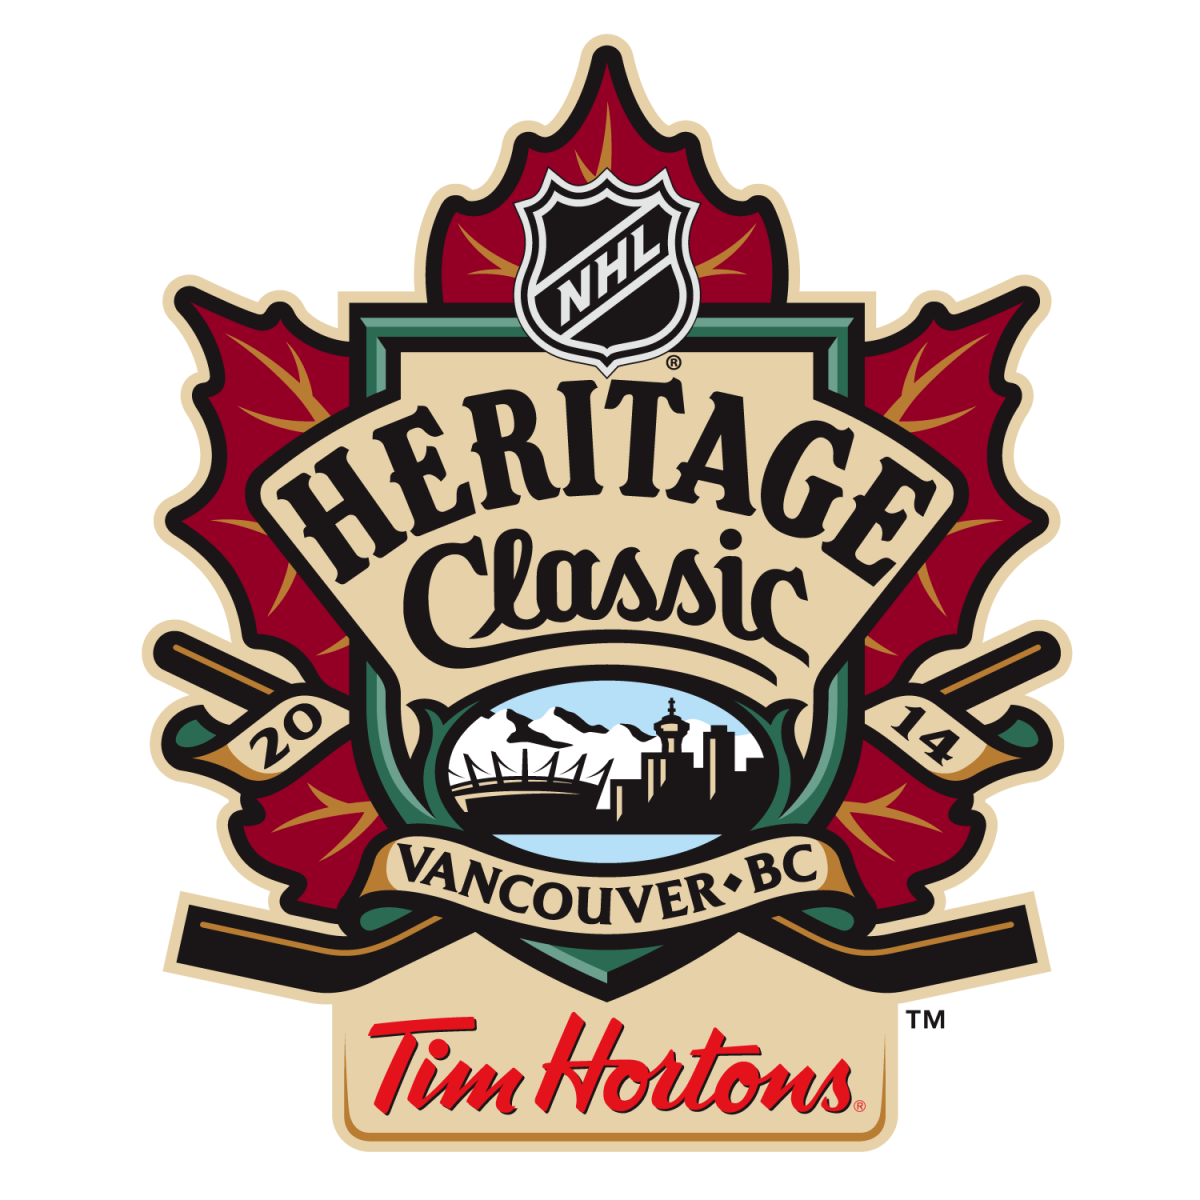 Vancouver Canucks promise to correct Heritage Classic ticket blunder - image